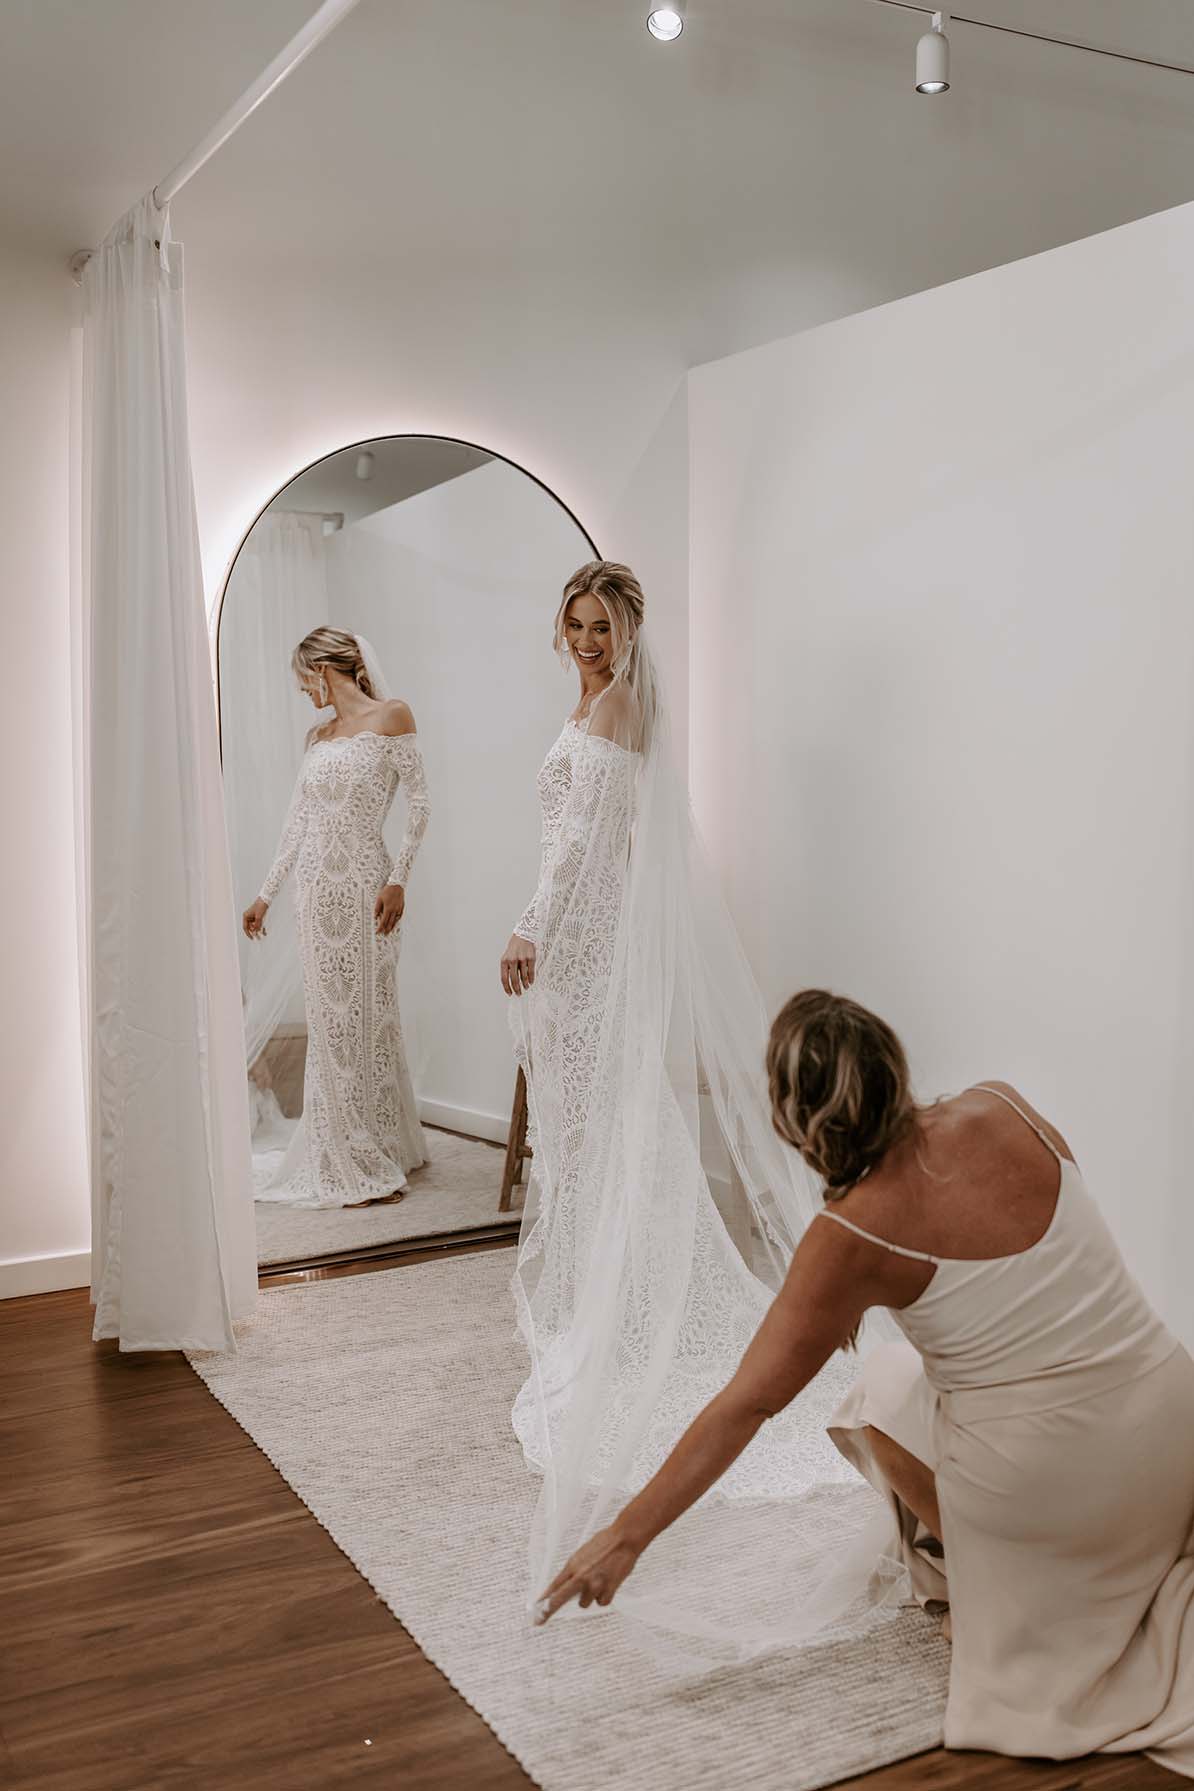 Stylist helping Bride with veil in Grace Loves Lace Showroom